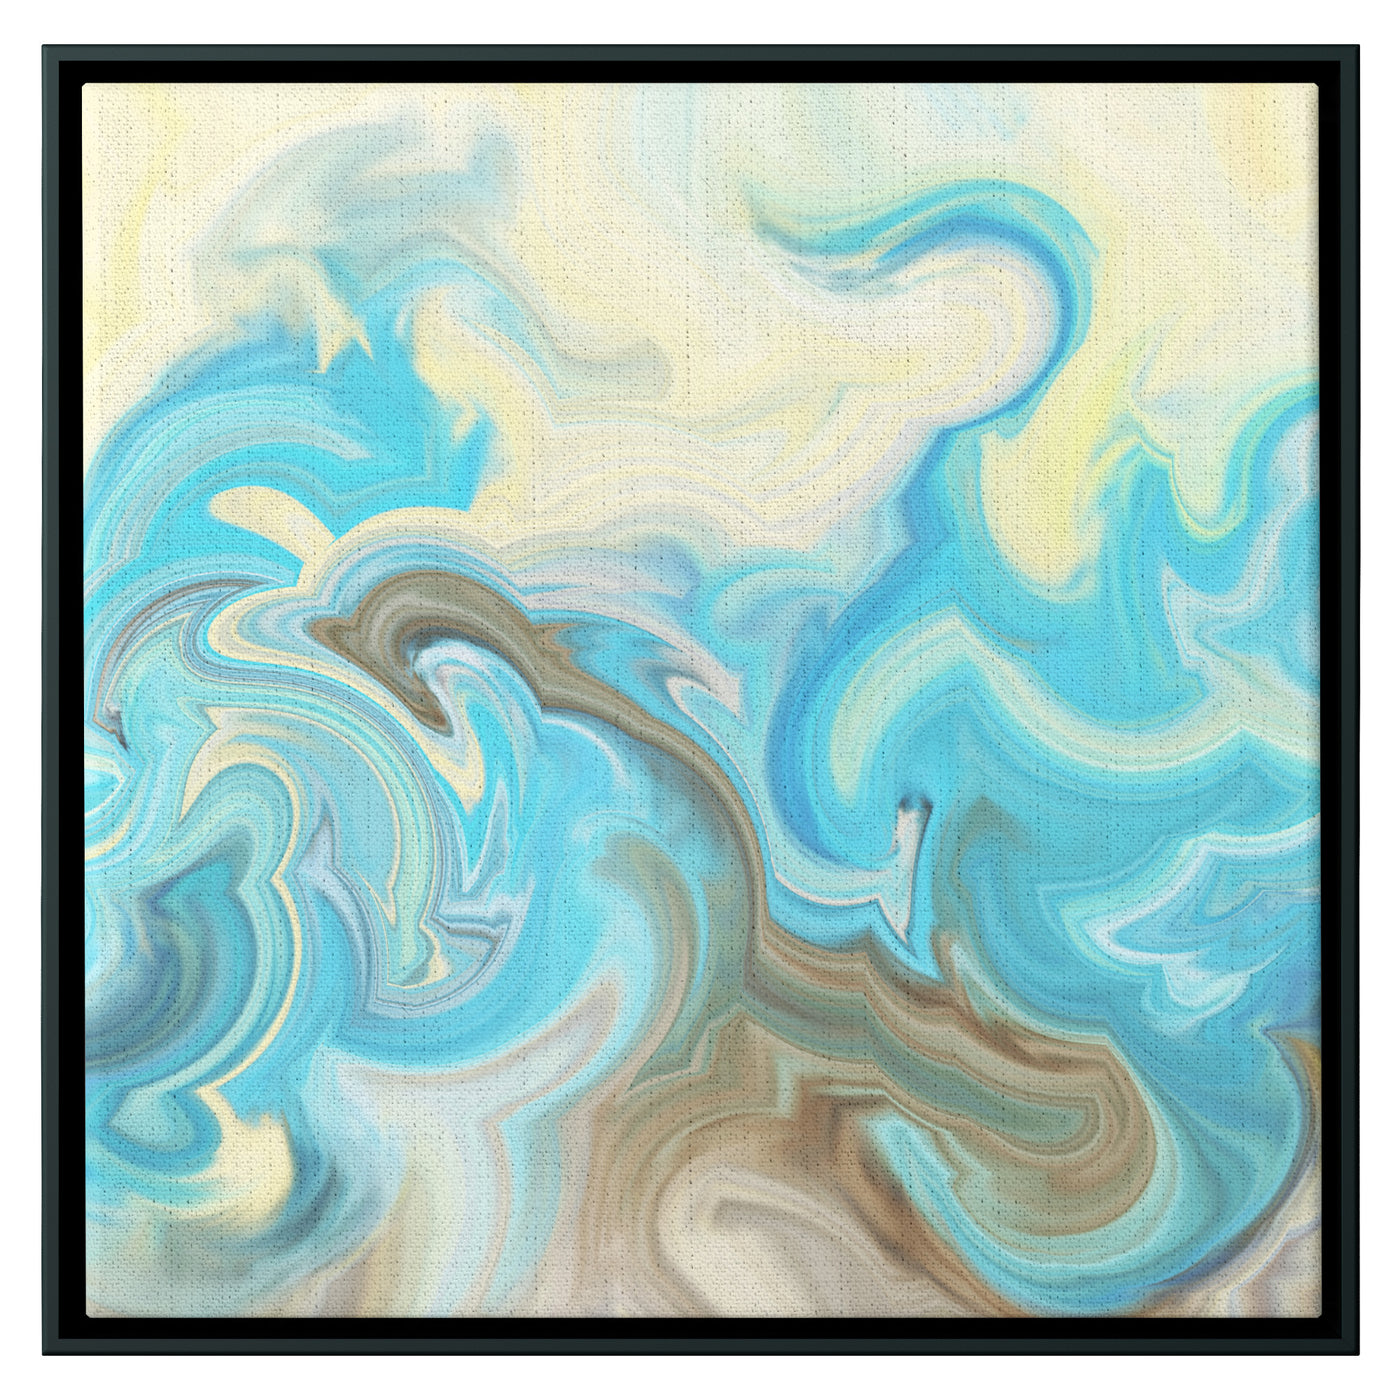 Calming Abstract Office Art 2 | Framed Canvas Print